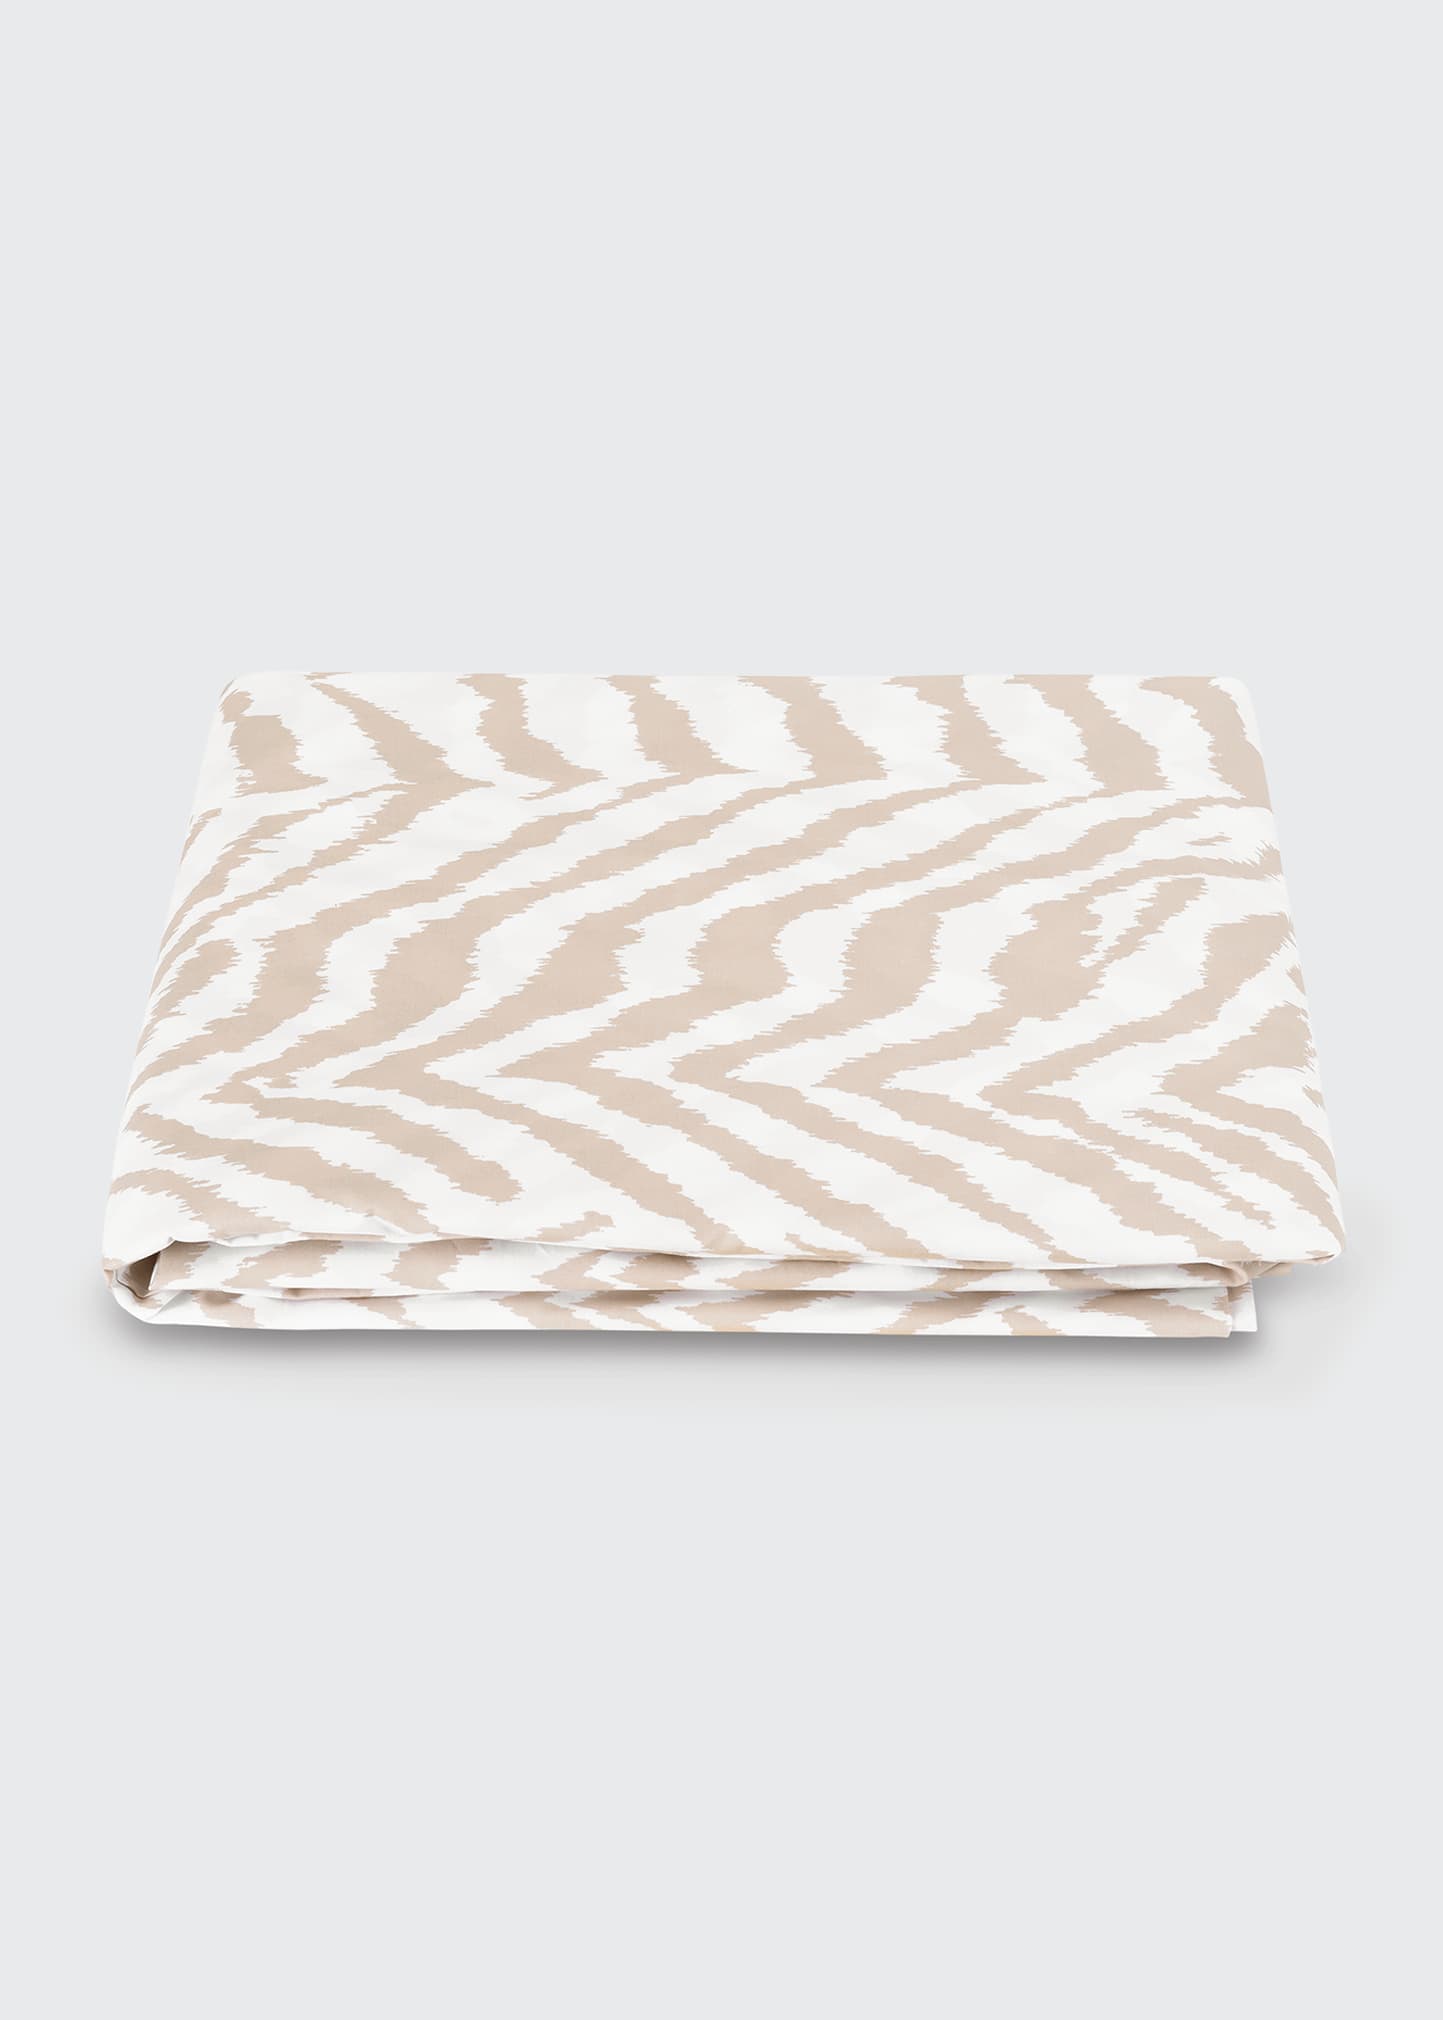 Quincy King Fitted Sheet